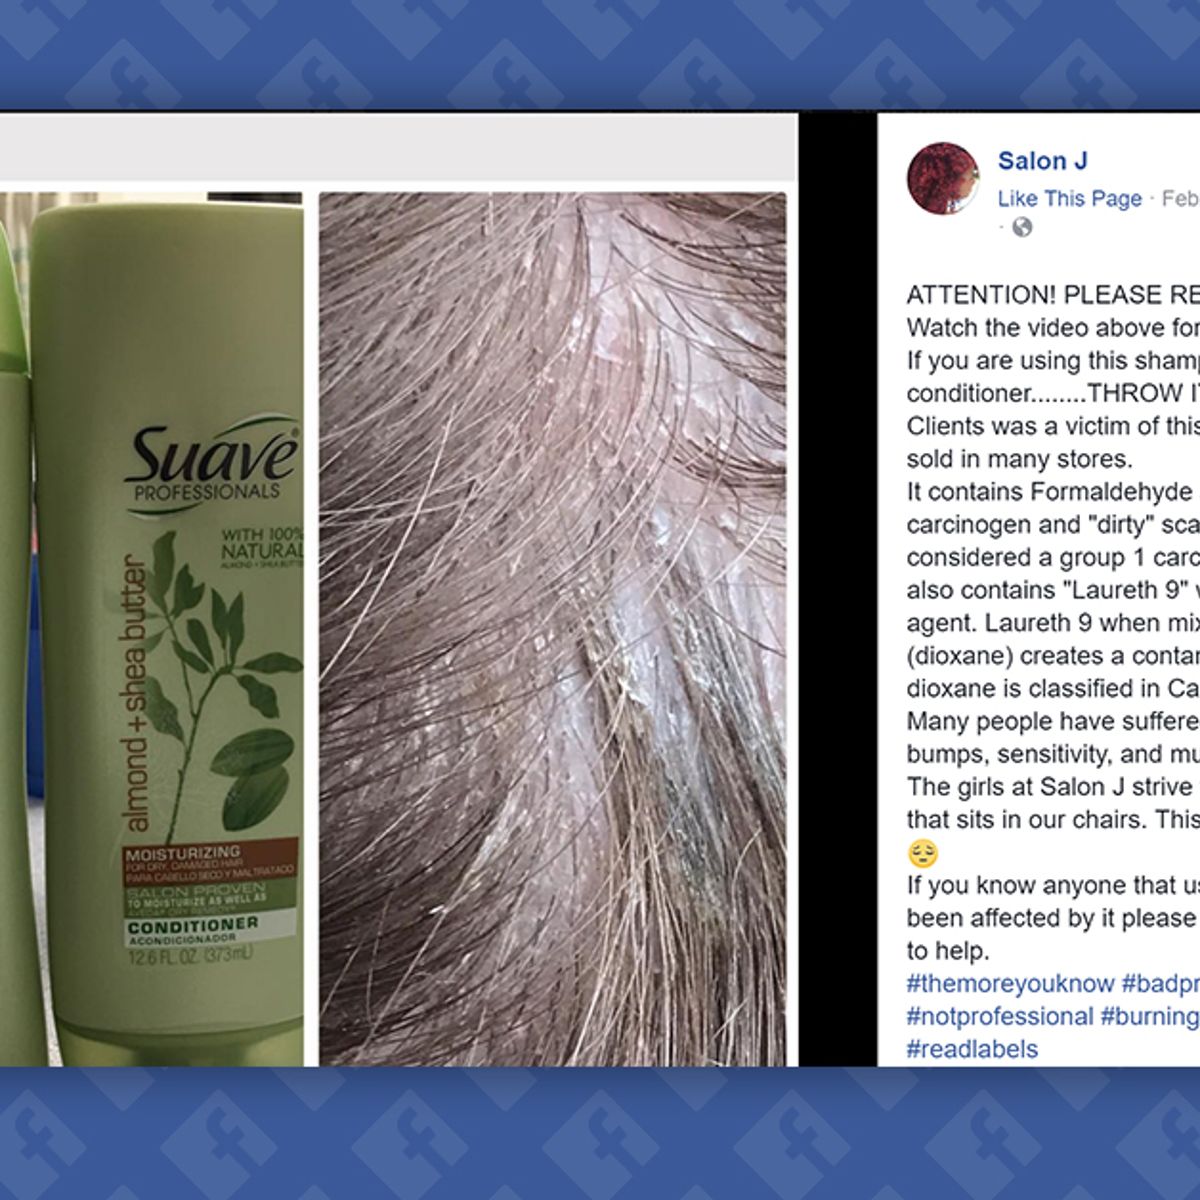 Does Suave Shampoo Contain an Ingredient That Causes Hair Loss? 